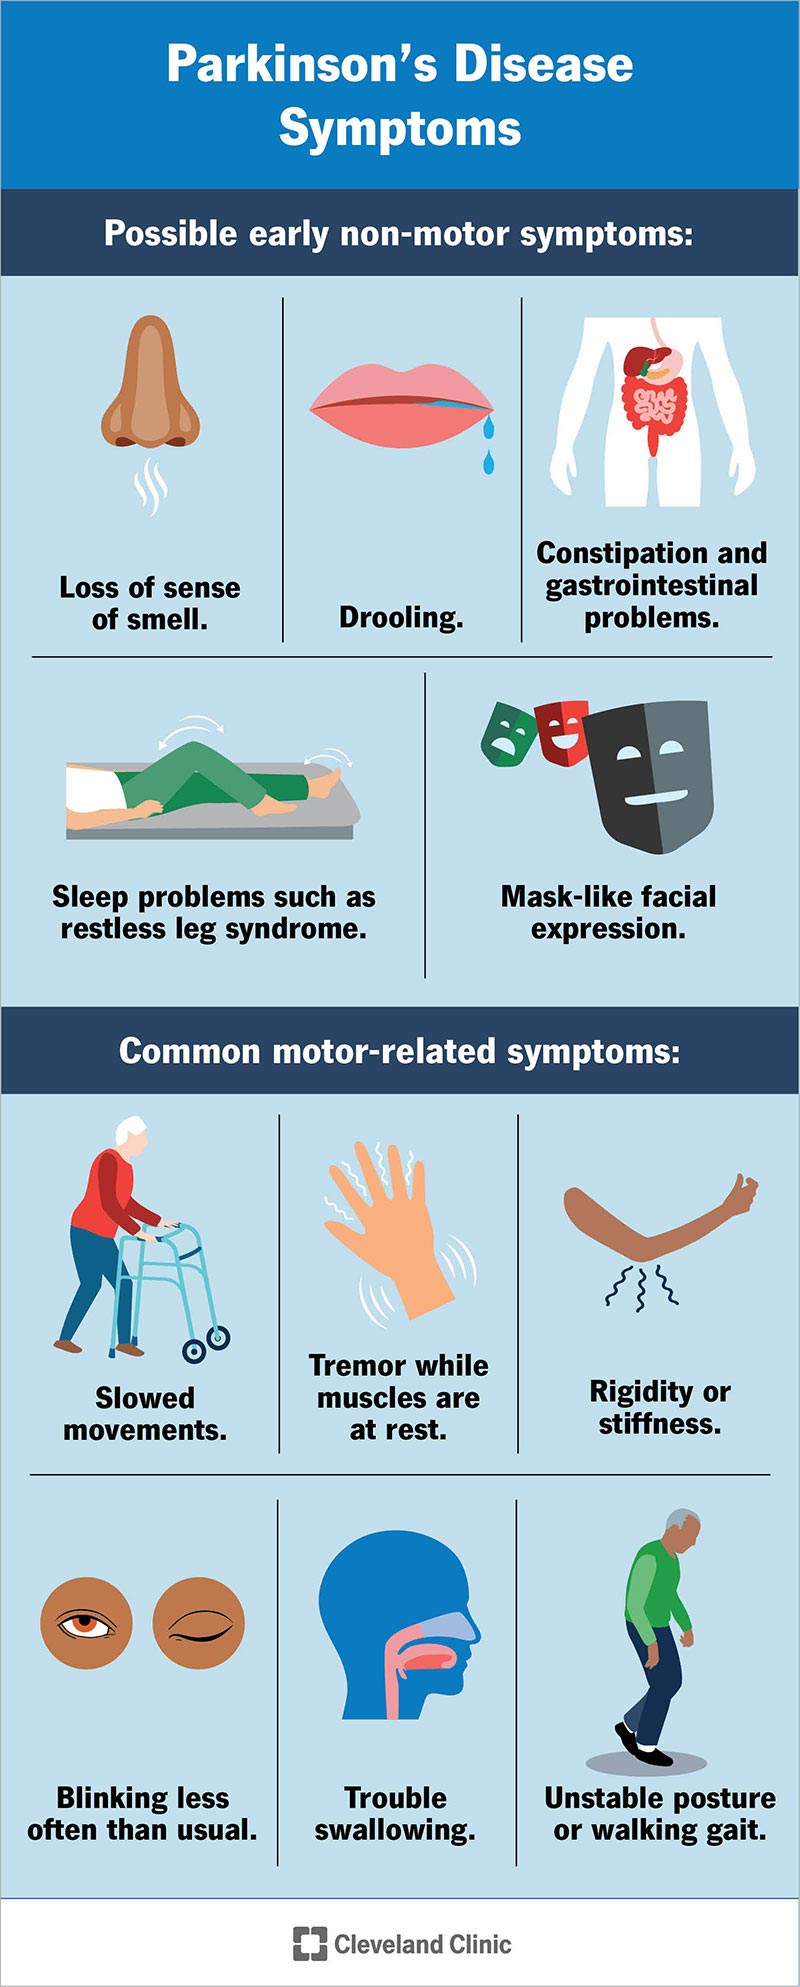 Parkinson’s disease symptoms, including non-motor and motor-related